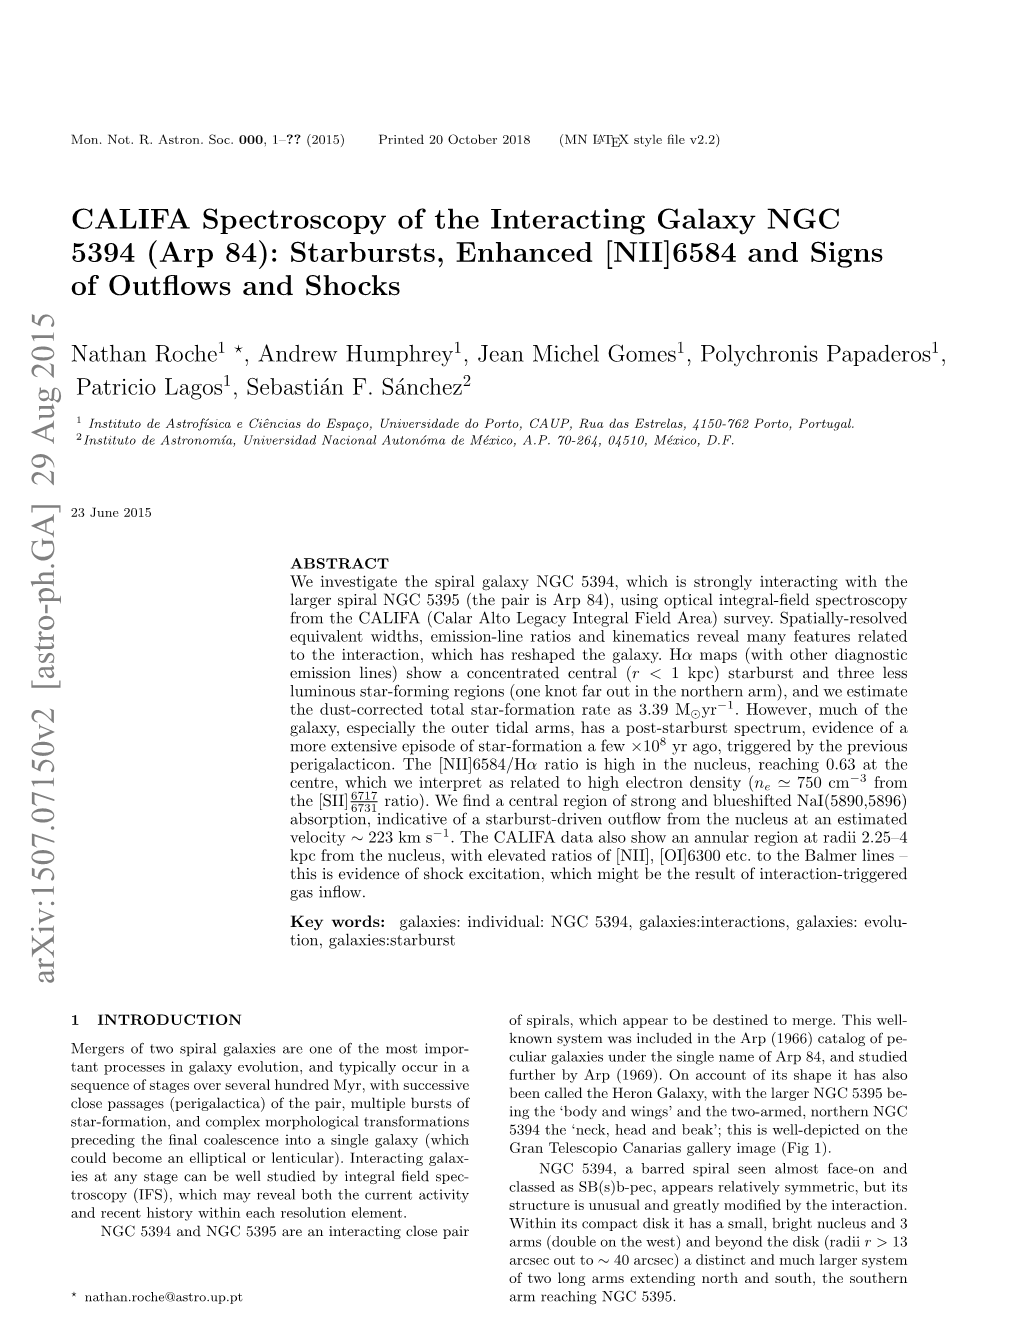 CALIFA Spectroscopy of the Interacting Galaxy NGC 5394 (Arp 84): Starbursts, Enhanced [NII] 6584 and Signs of Outflows and Shocks